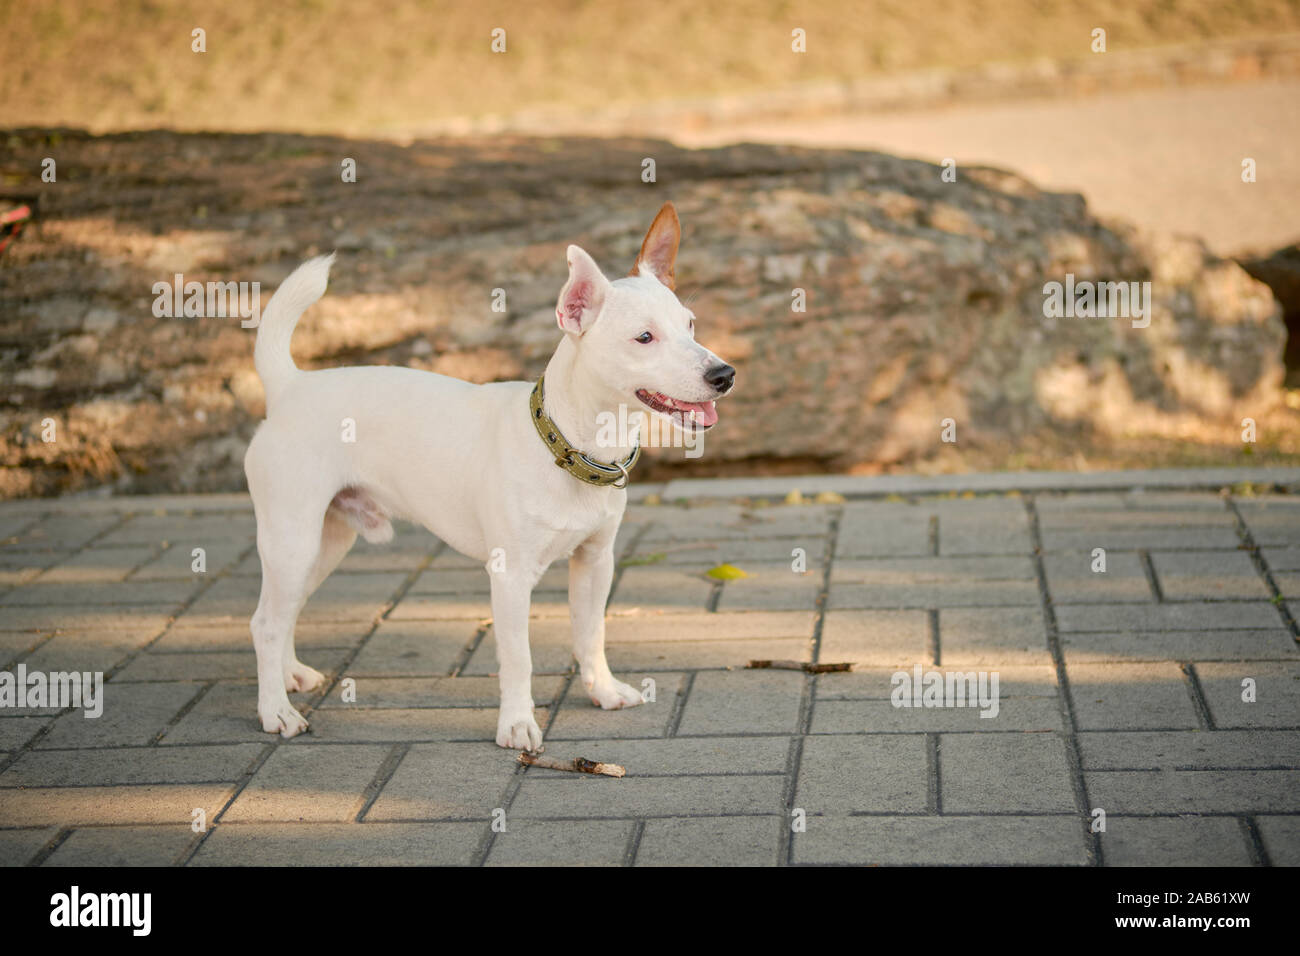 Dog Parson Russell Terrier breed is playing in green park. Summer time or beginning of autumn. Nature. Pet care and training concept. Stock Photo